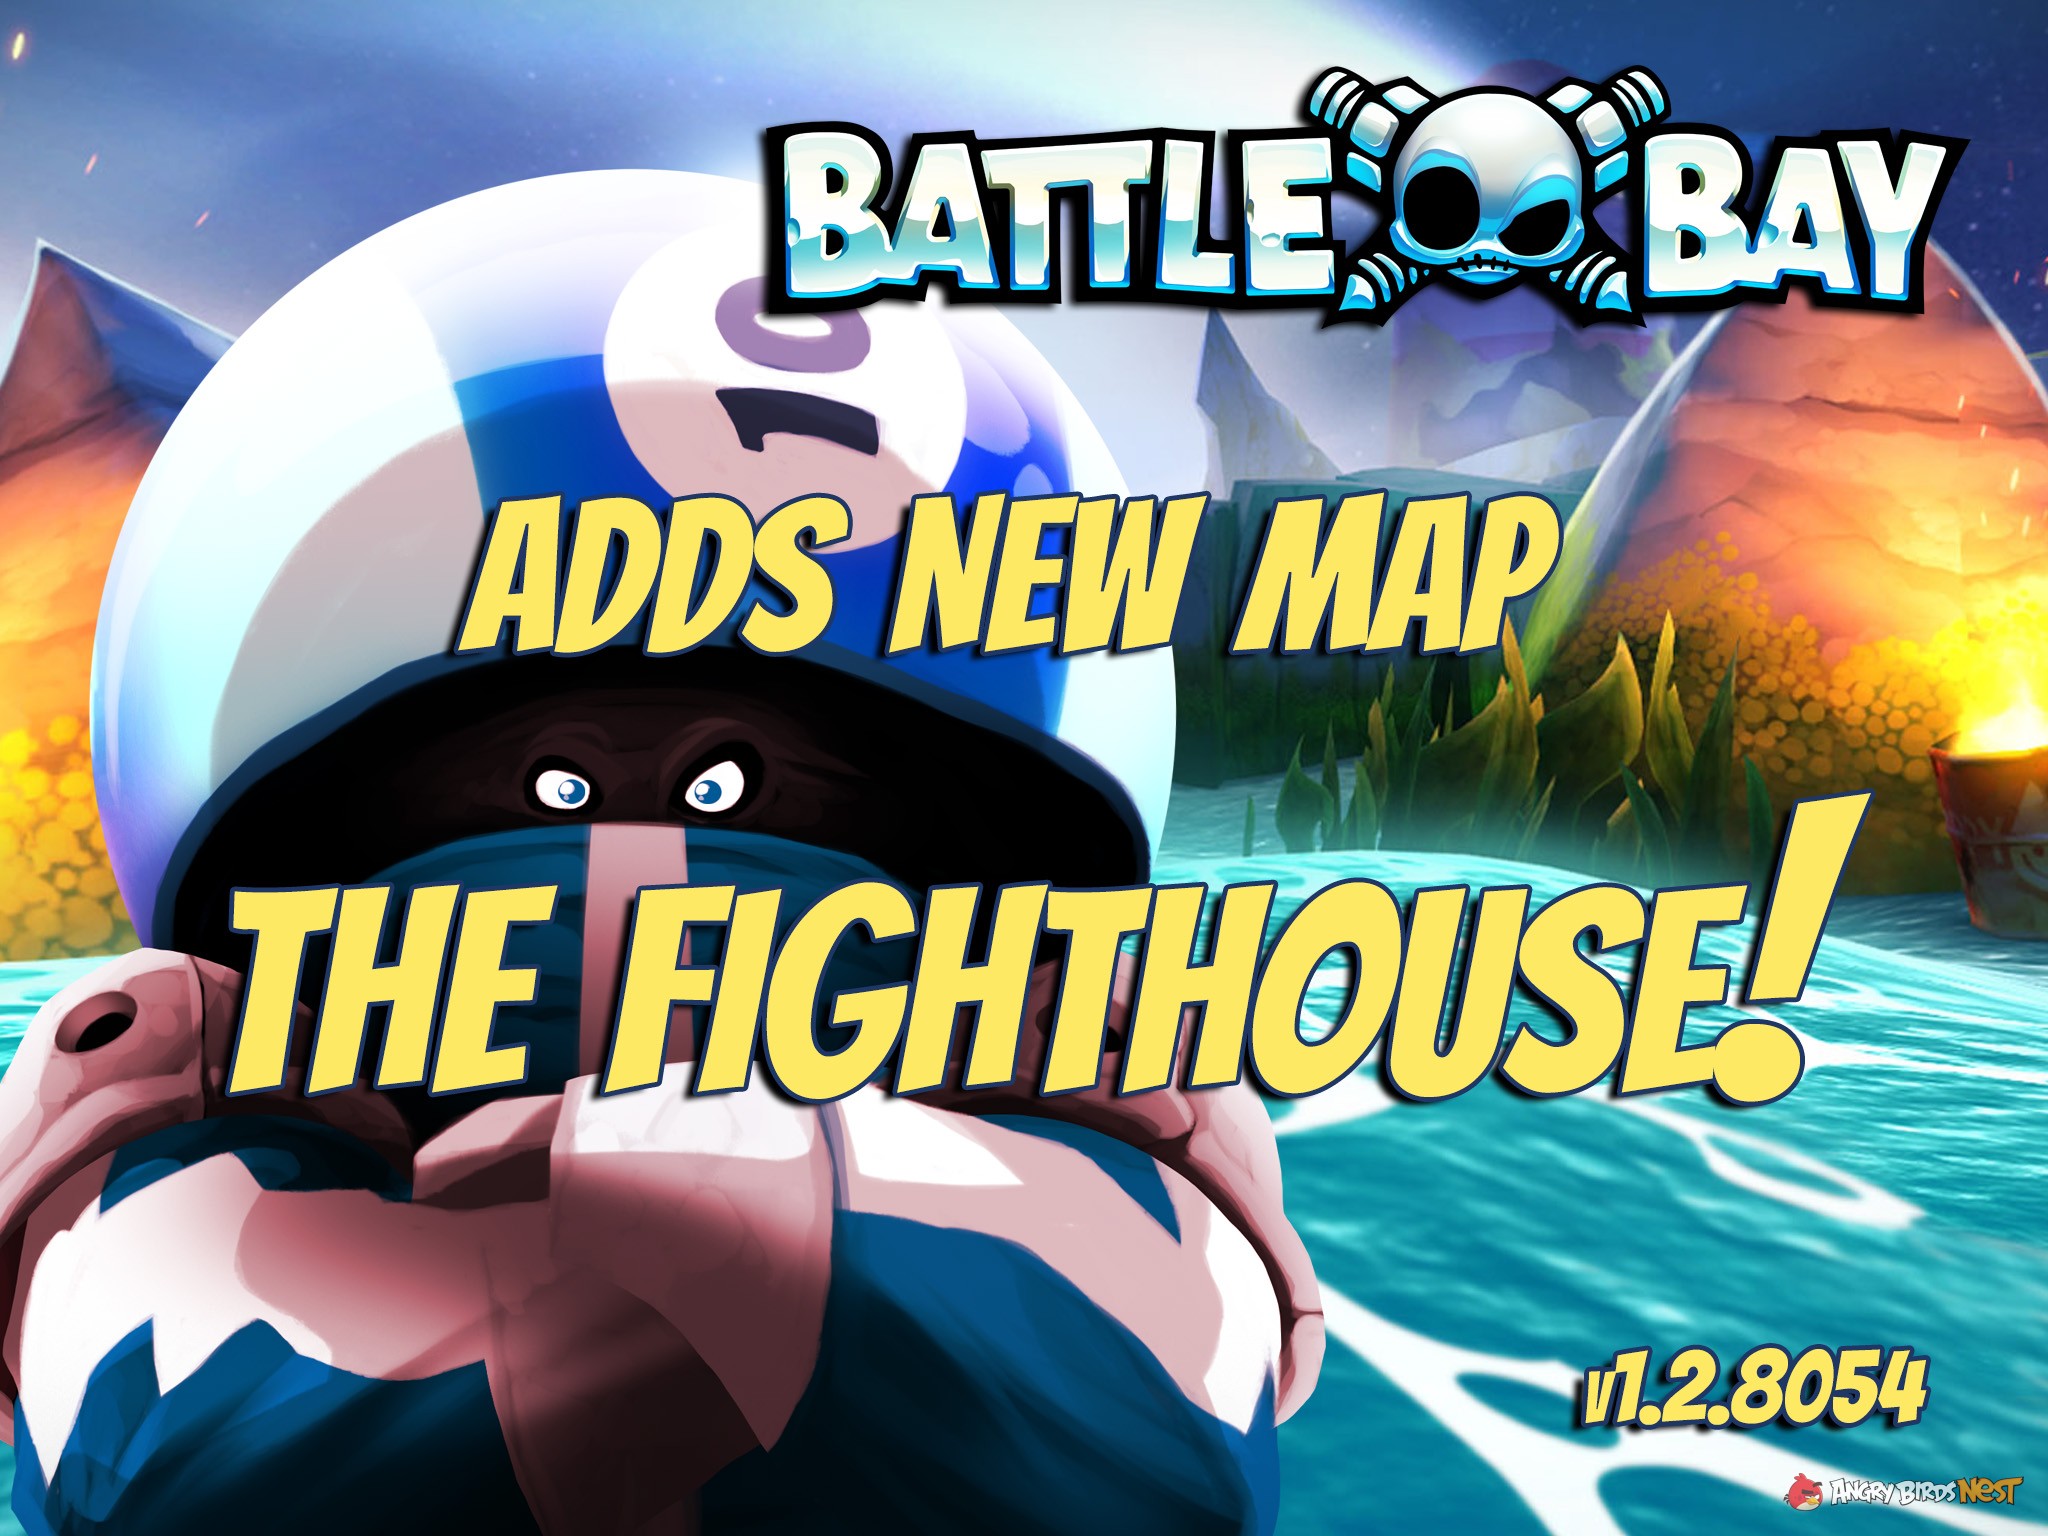 Battle Bay Update Adds The Fighthouse and new item